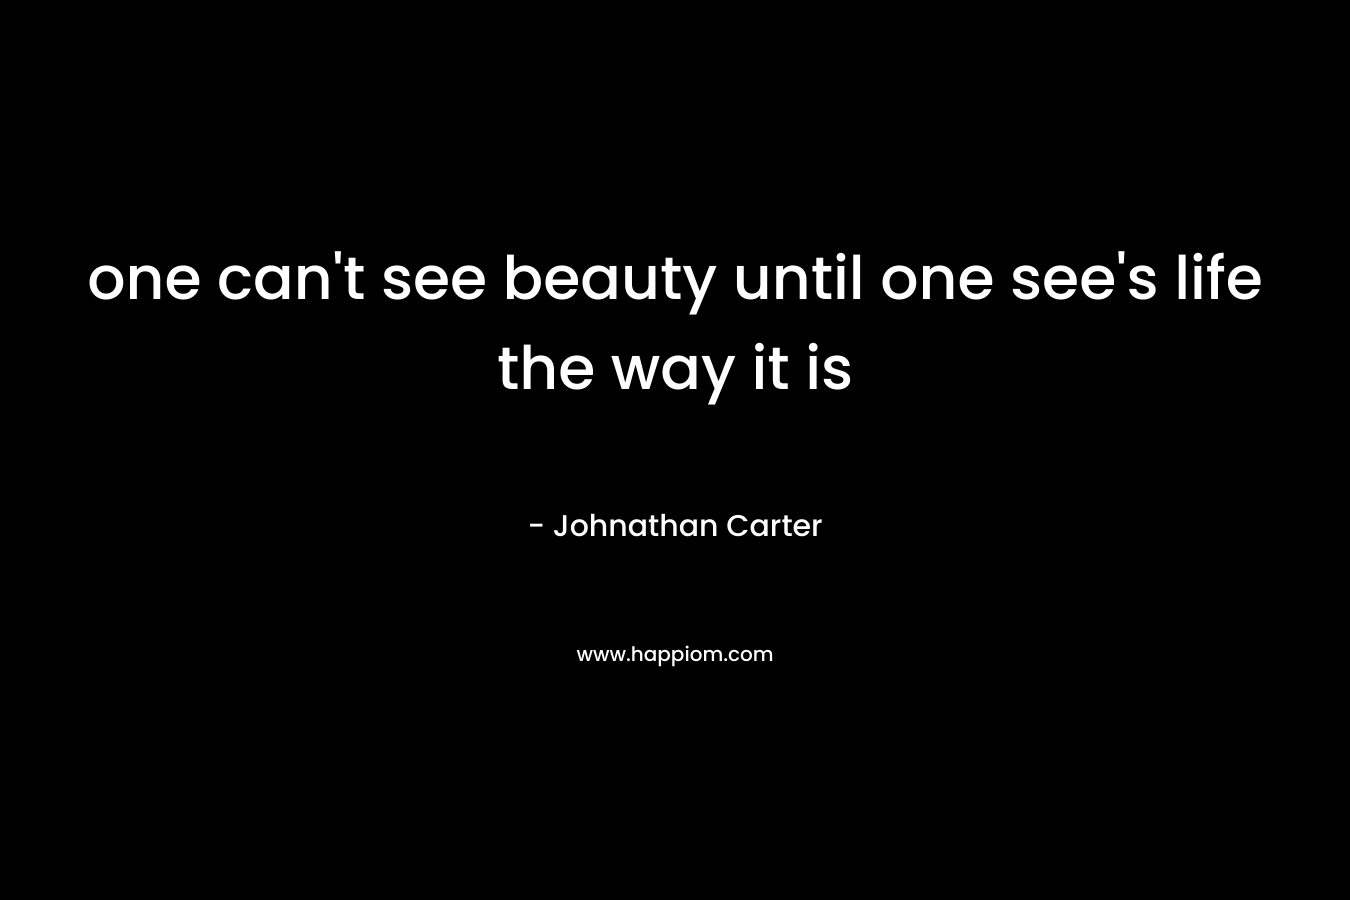 one can't see beauty until one see's life the way it is